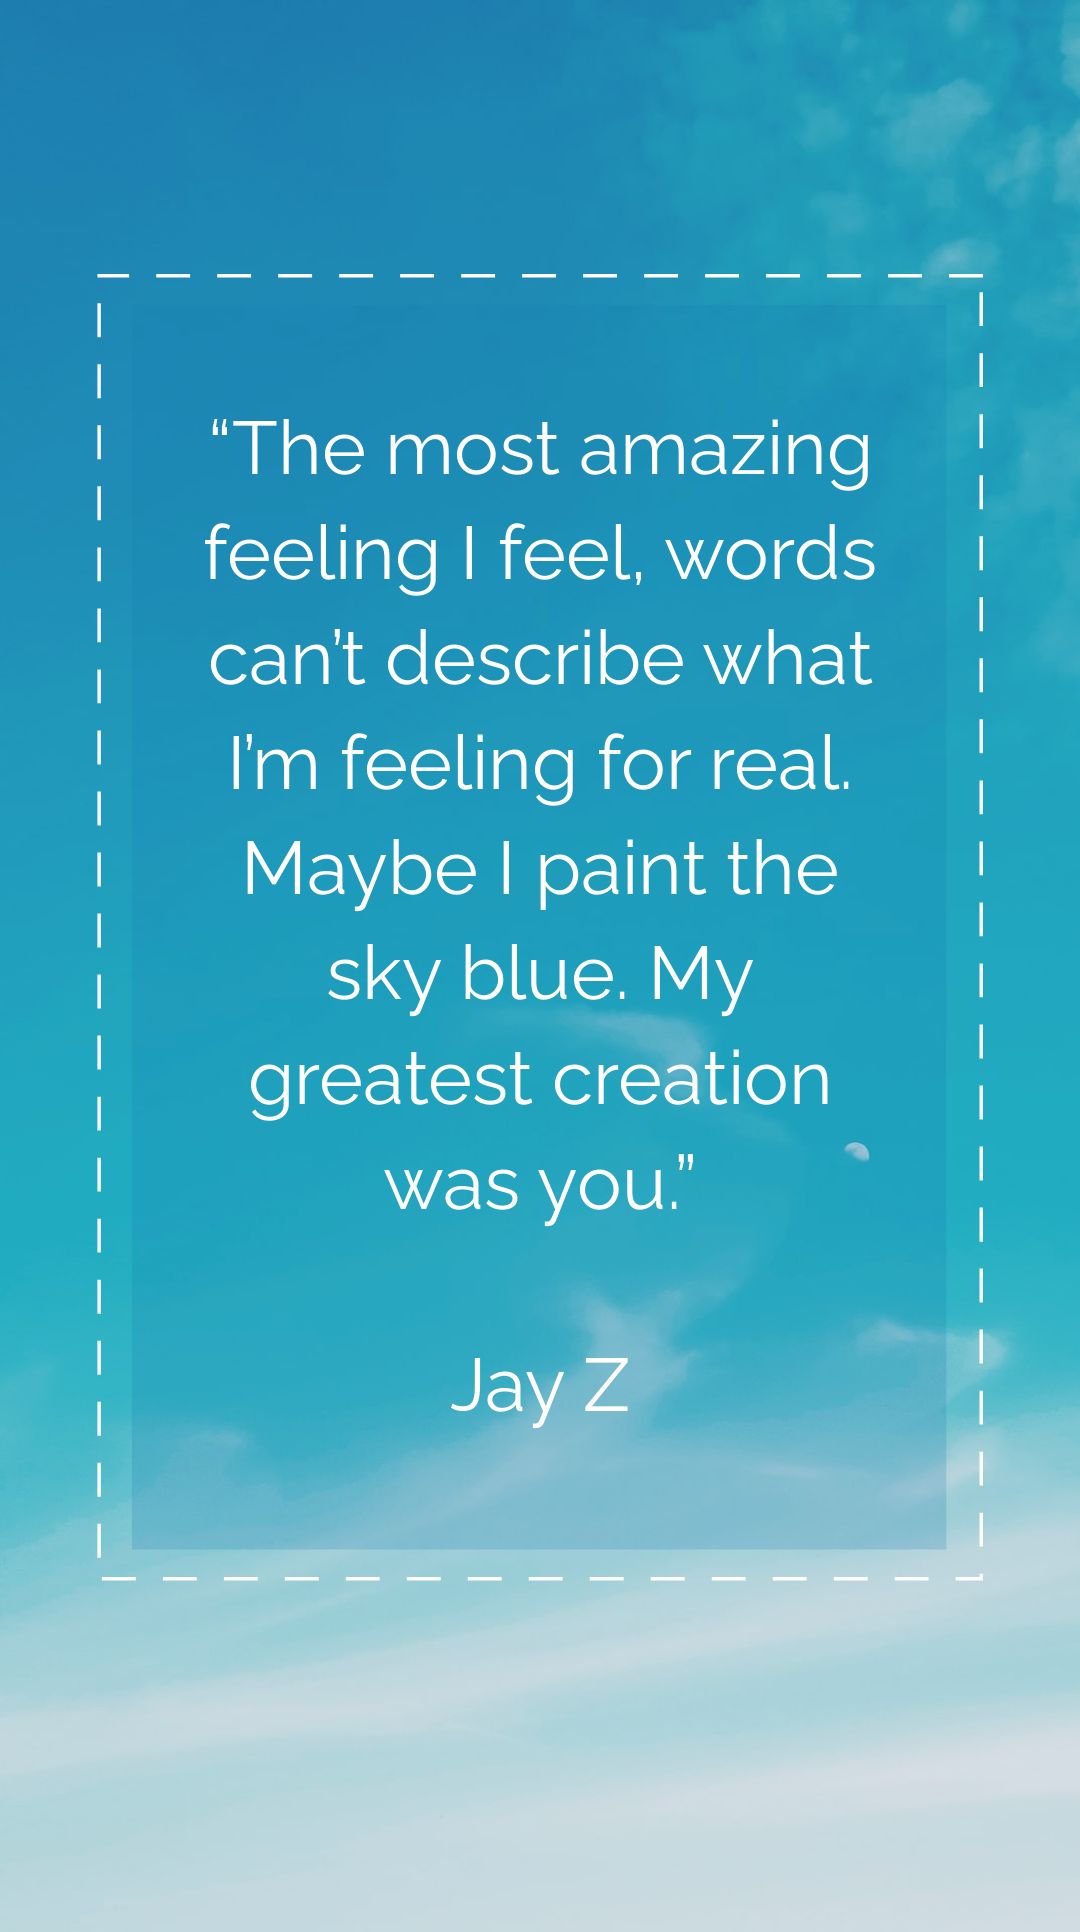 Jay Z - The most amazing feeling I feel, words can’t describe what I’m feeling for real. Maybe I paint the sky blue. My greatest creation was you.